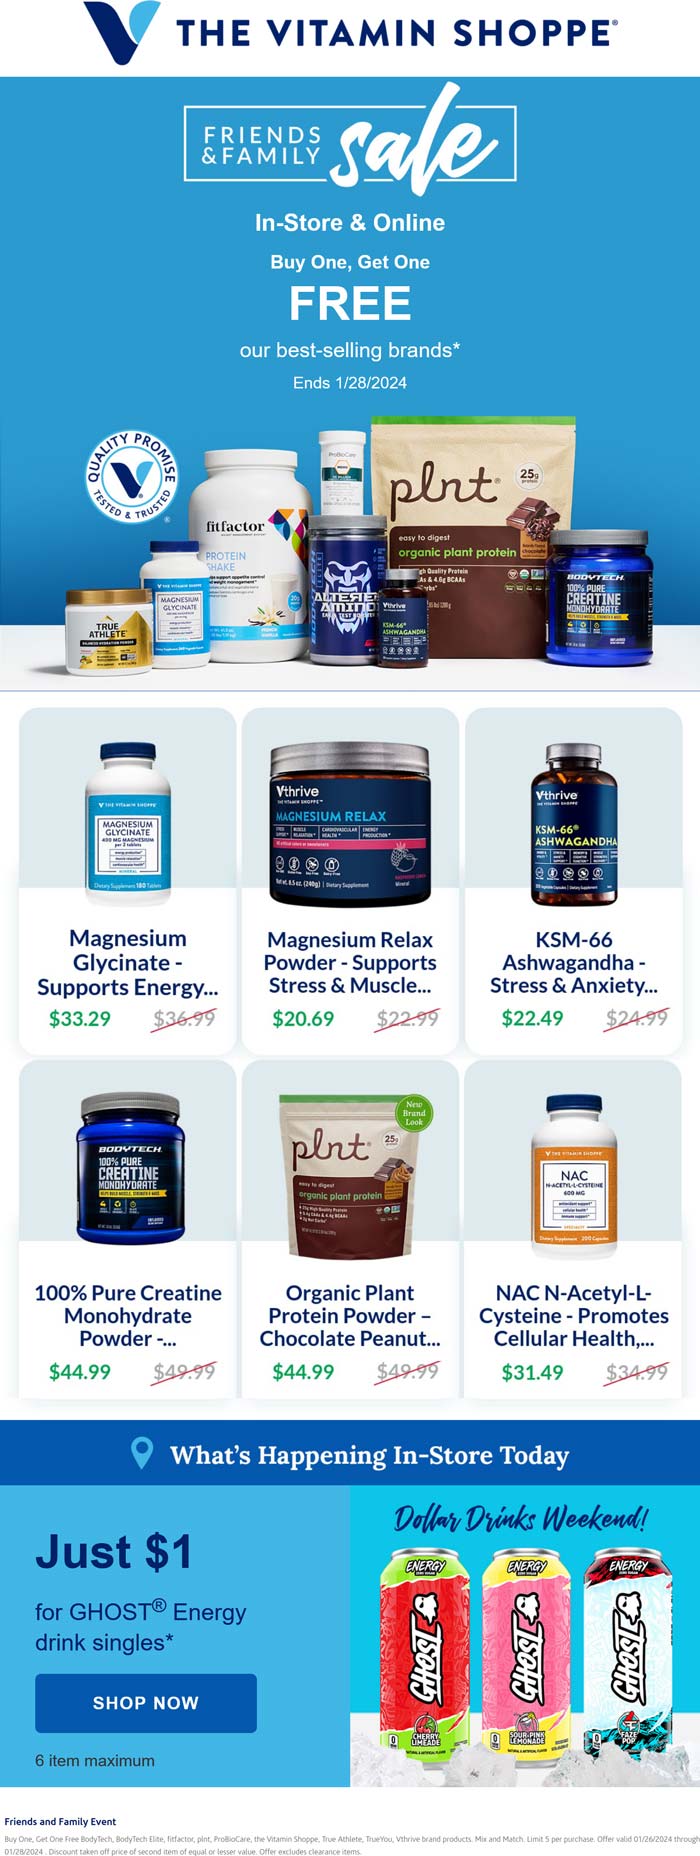 The Vitamin Shoppe stores Coupon  Second best seller free at The Vitamin Shoppe, ditto online #thevitaminshoppe 